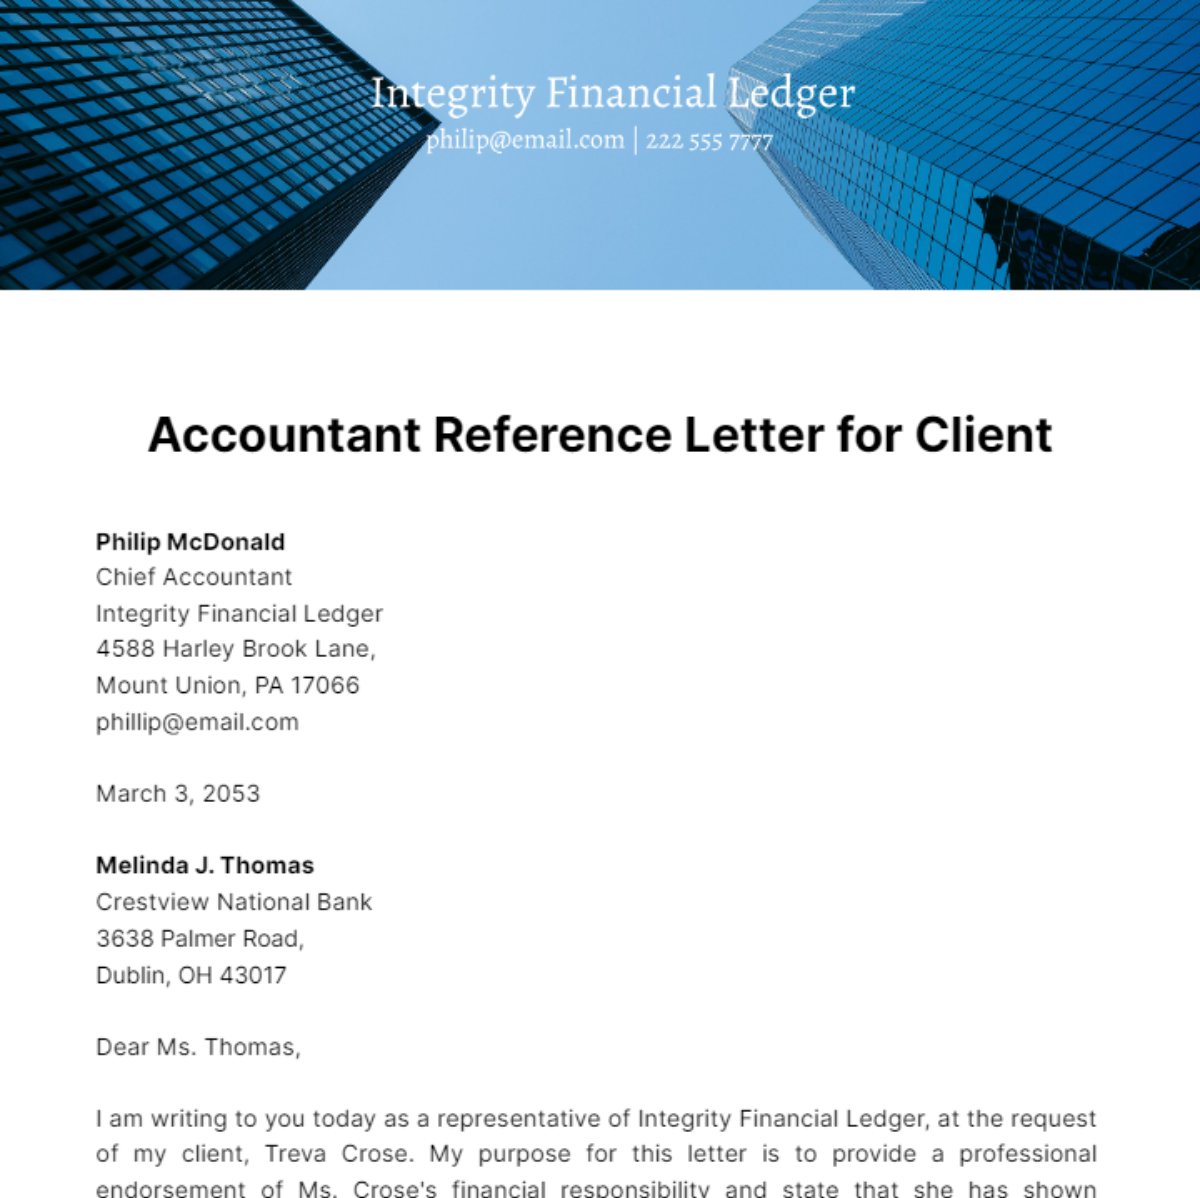 Accountant Reference Letter for Client Template